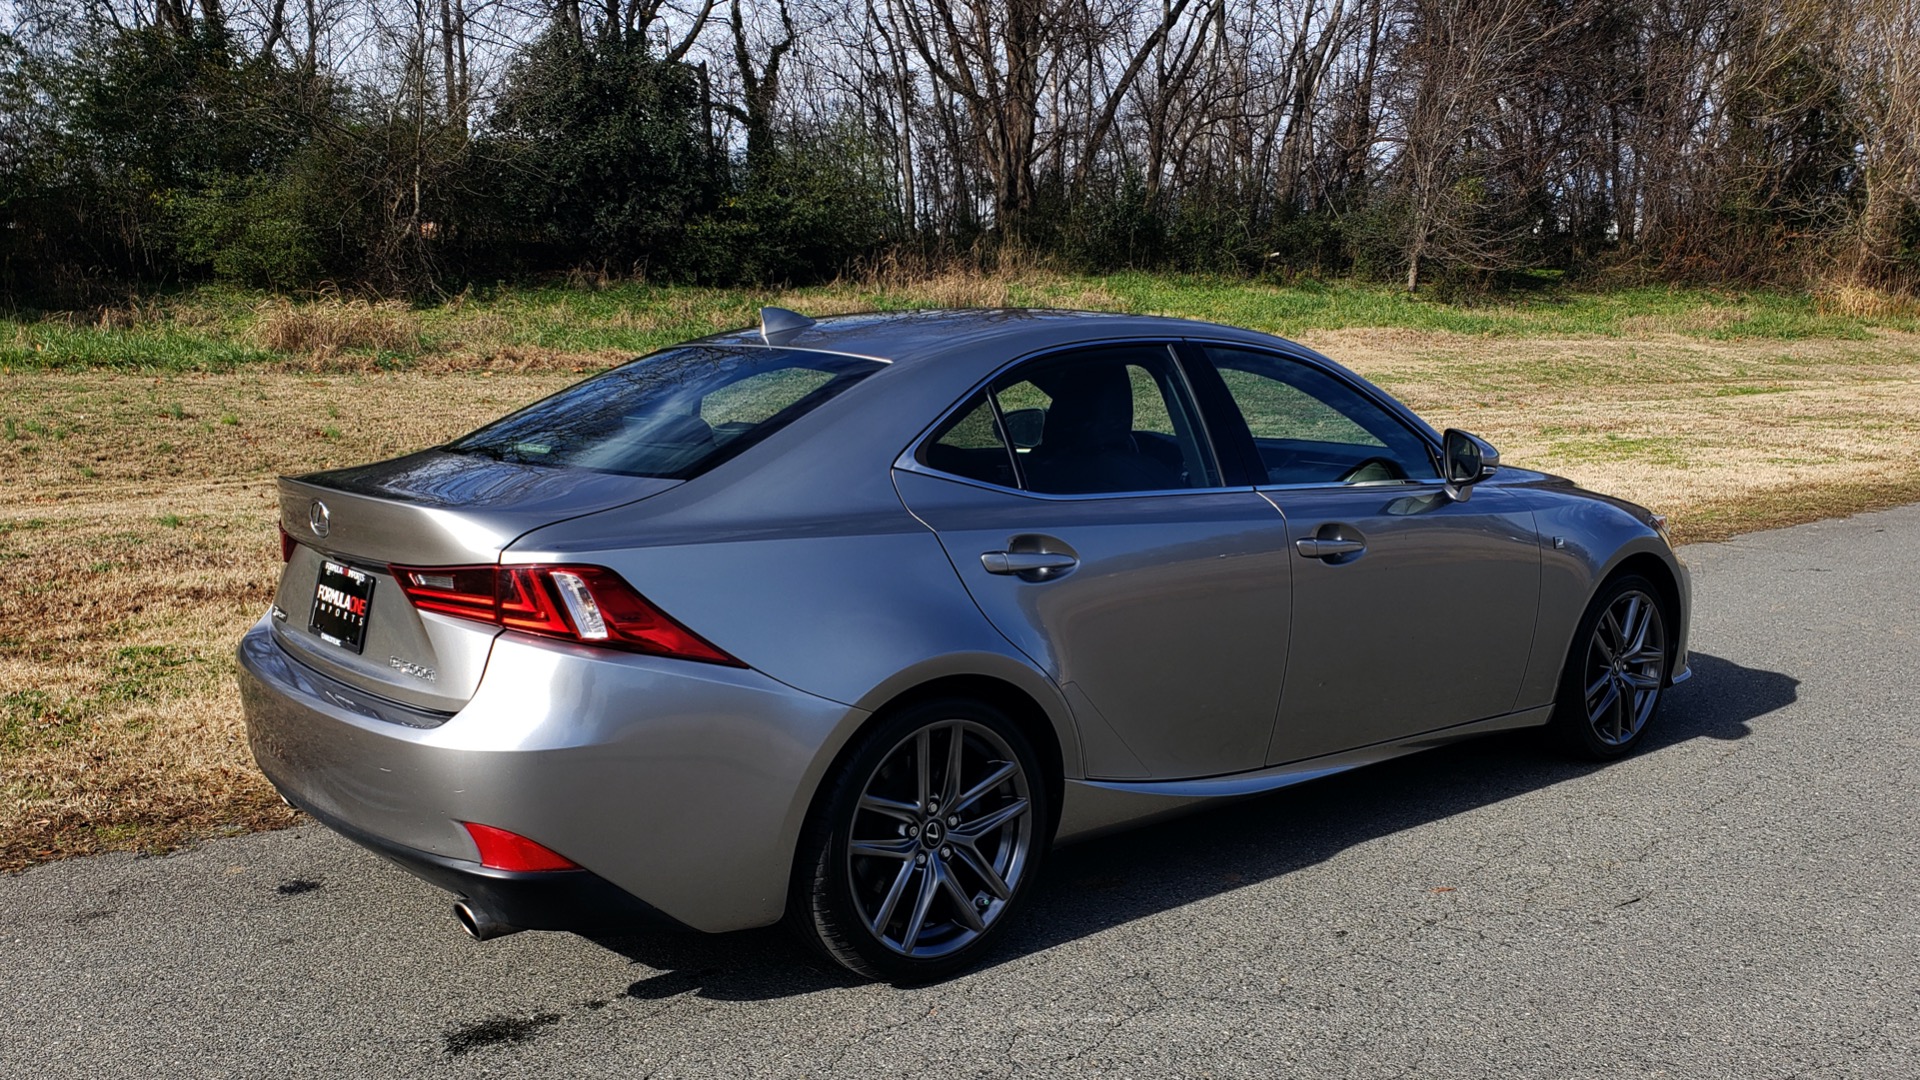 Used 2016 Lexus IS 200t F-SPORT / SUNROOF / NAV / BSM / DYNAMIC RADAR CRUISE for sale Sold at Formula Imports in Charlotte NC 28227 9